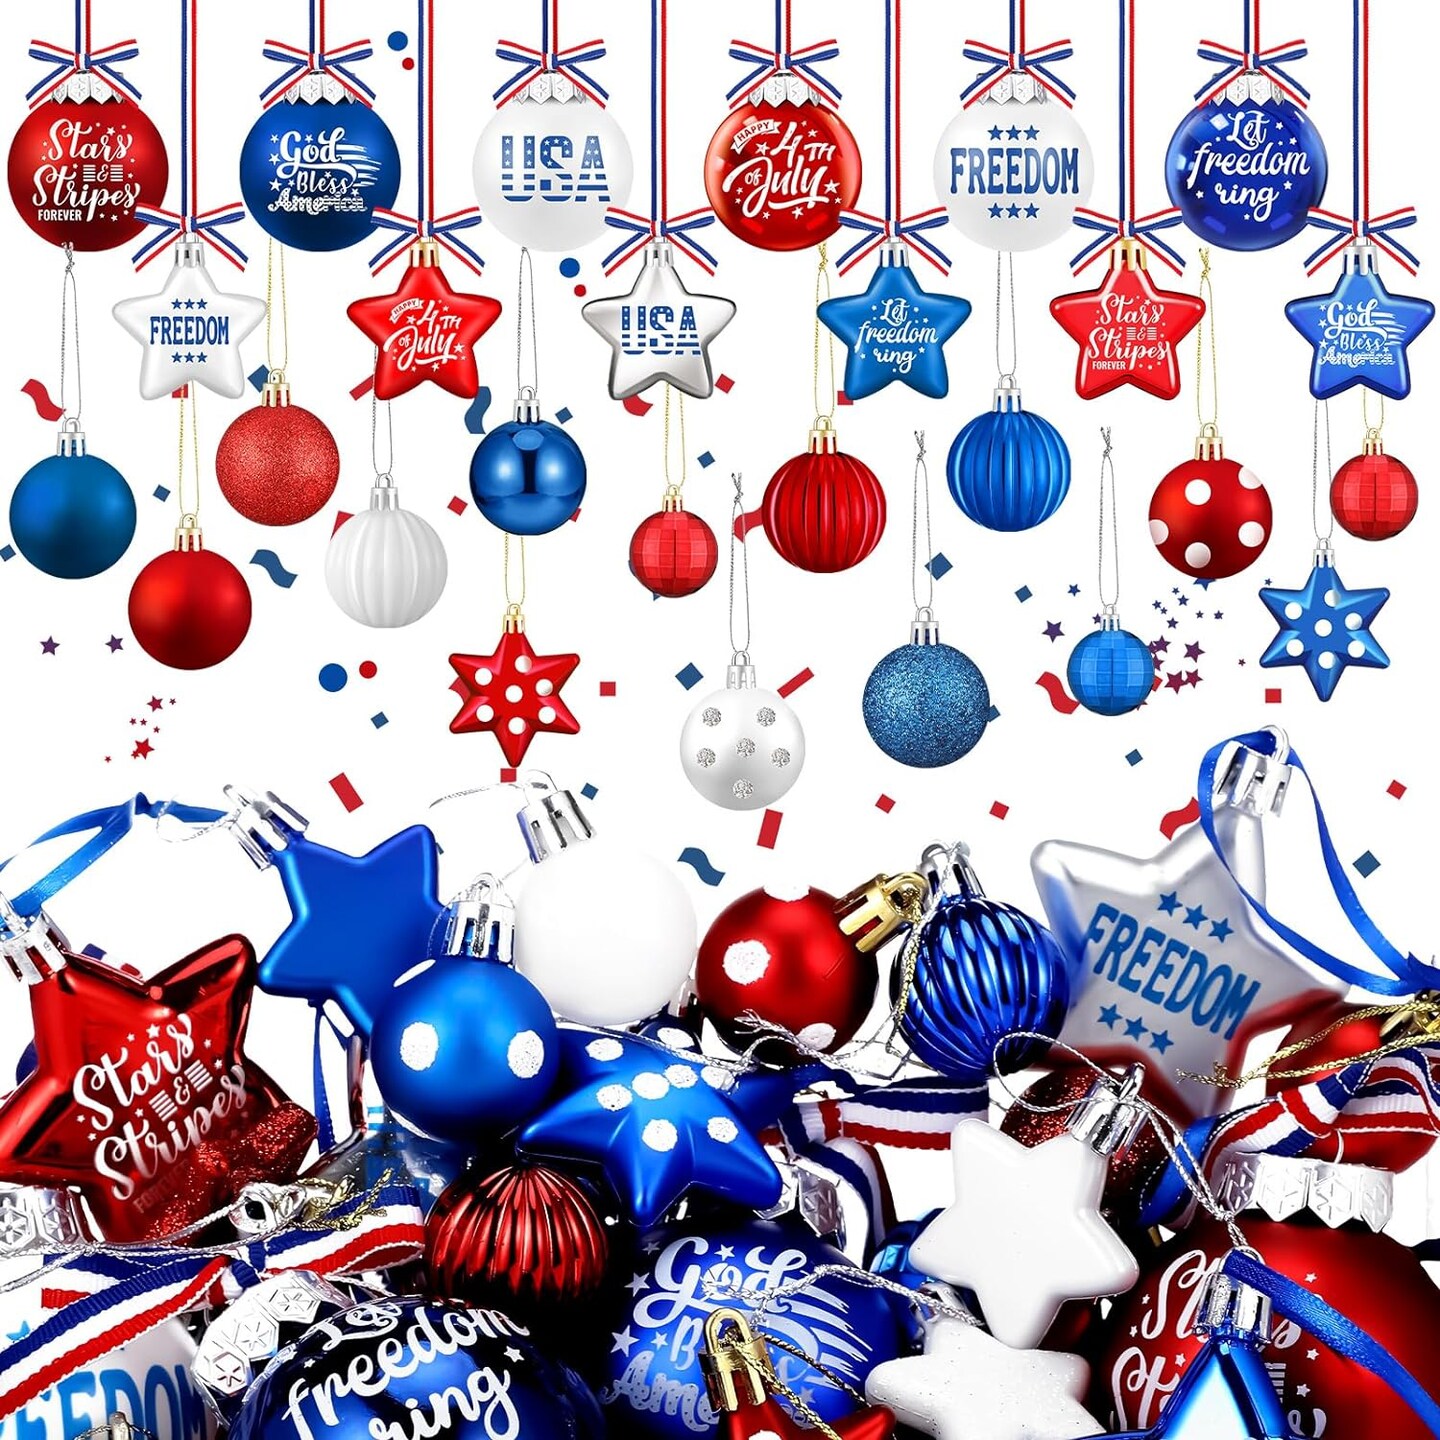 48 Pieces 4th of July Tree Ornaments Patriotic Star Ball Hanging Decorations.